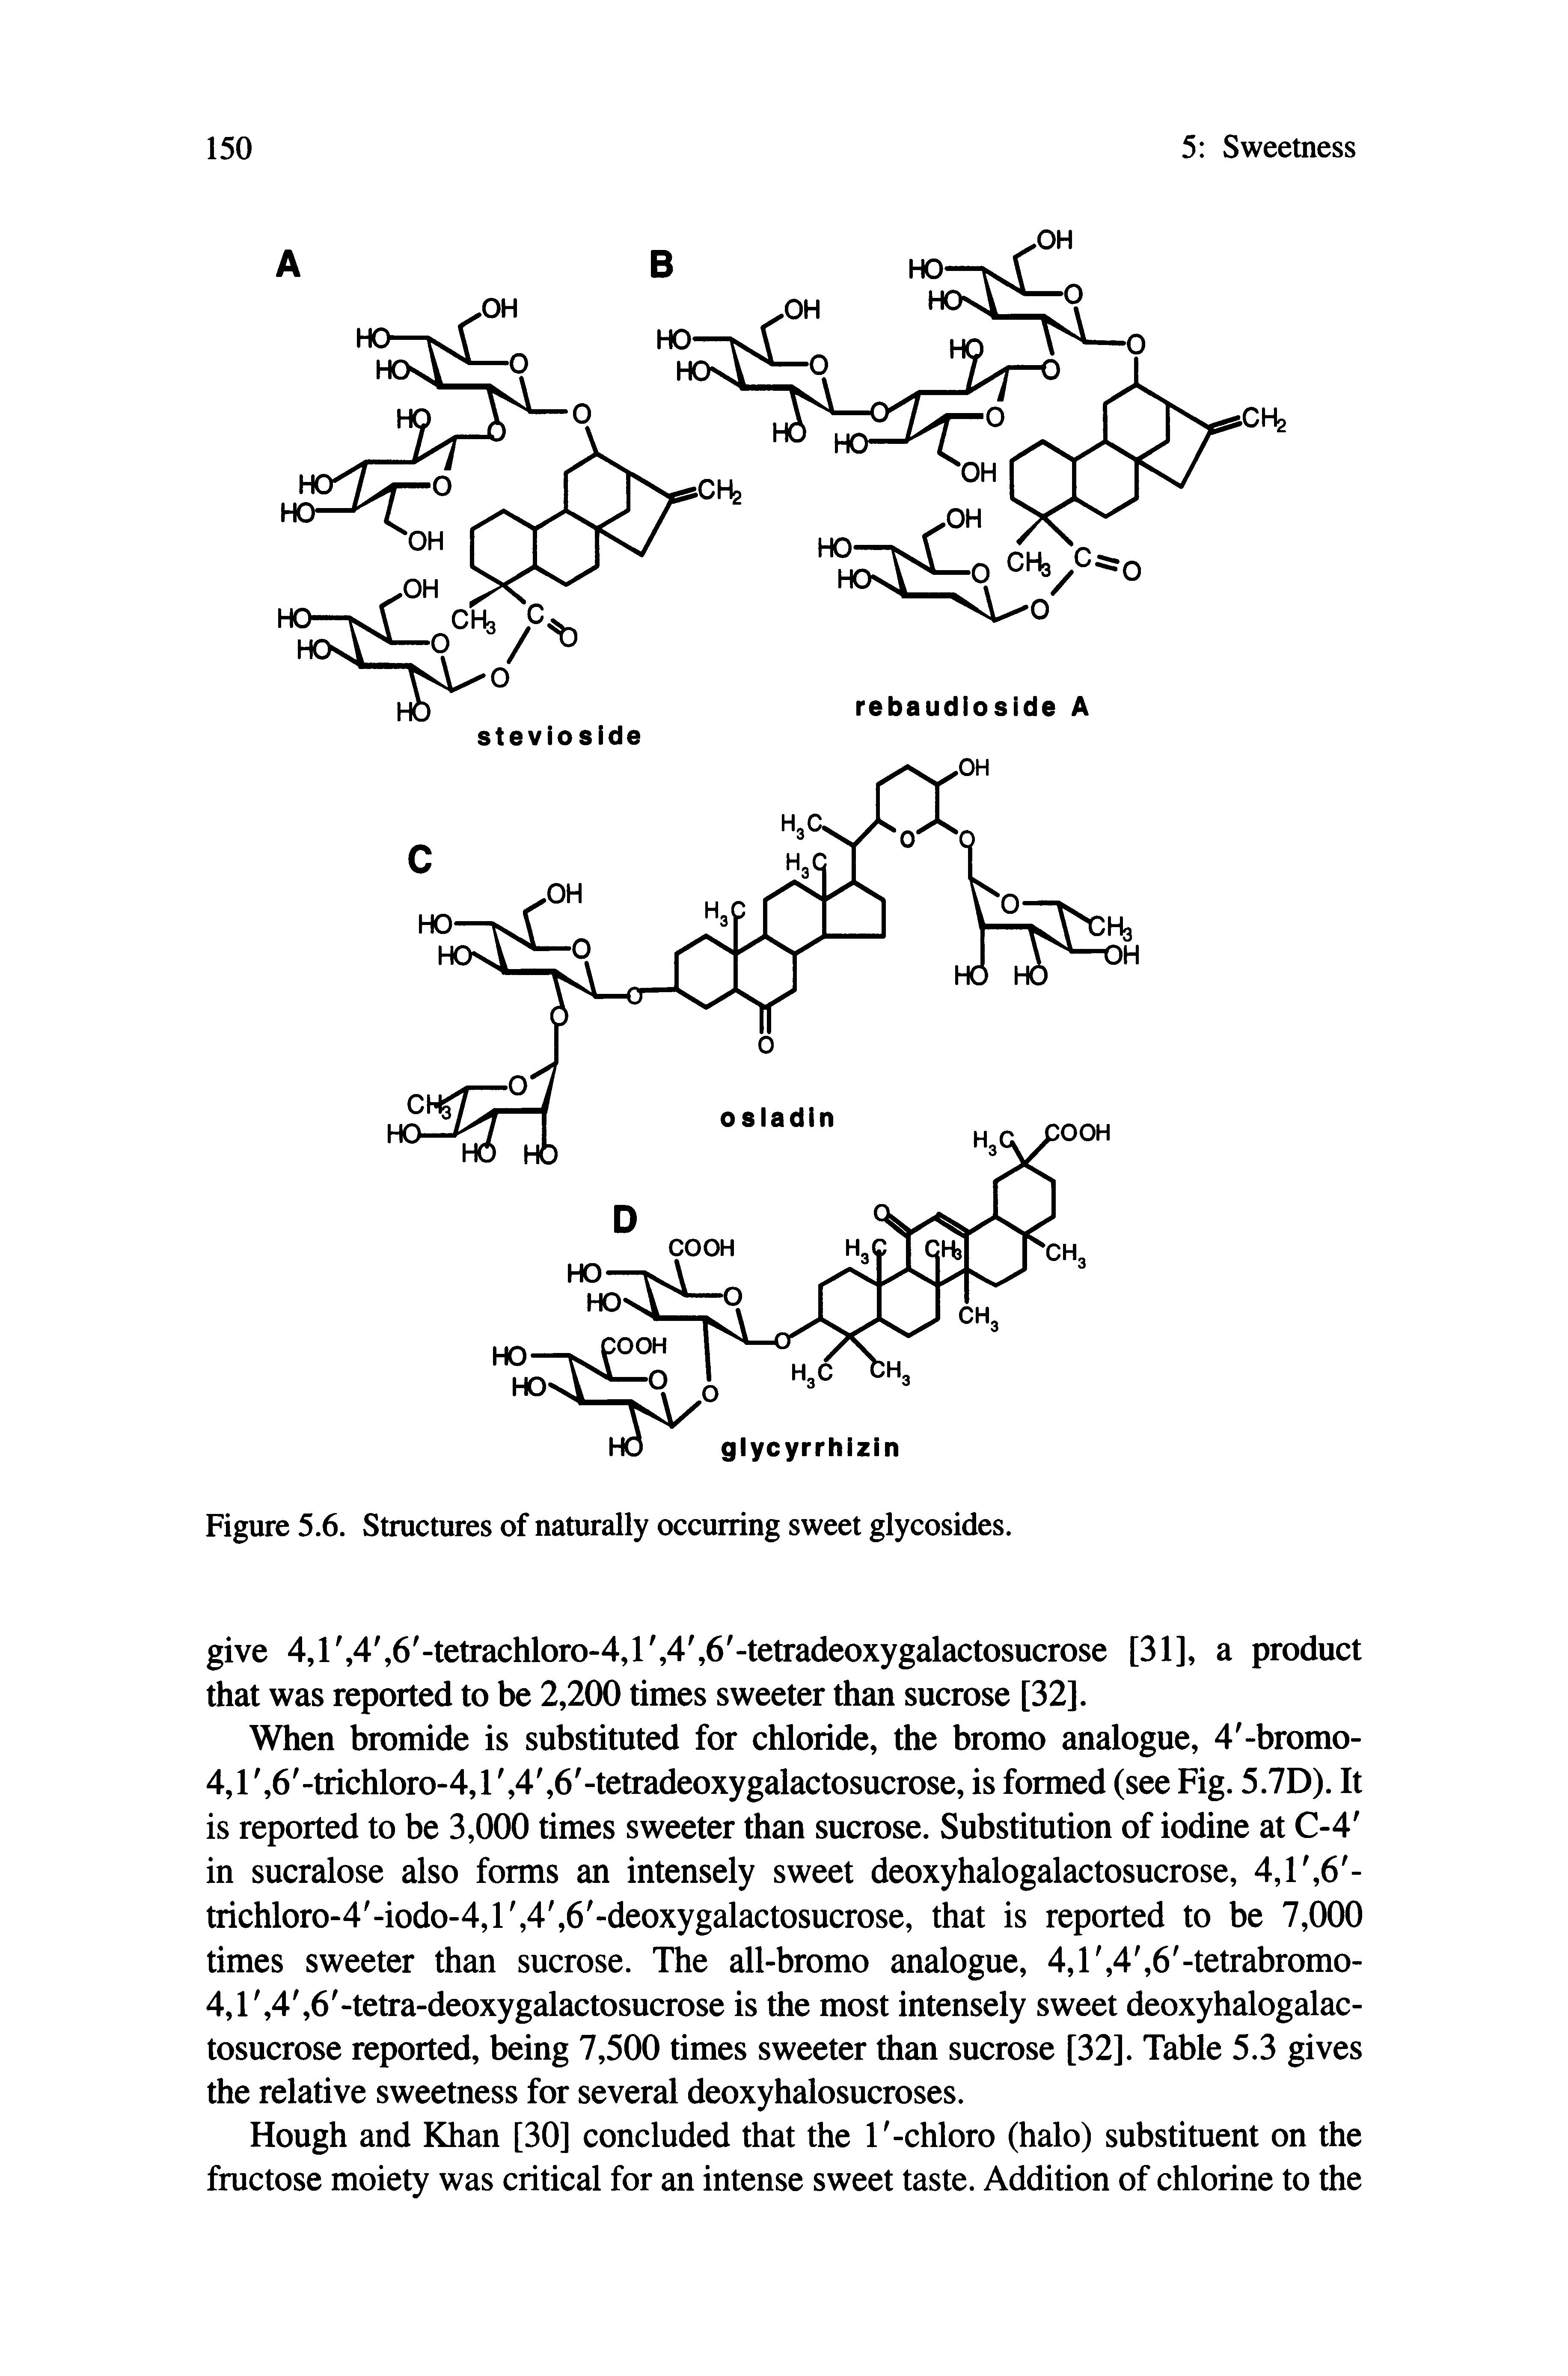 Figure 5.6. Structures of naturally occurring sweet glycosides.